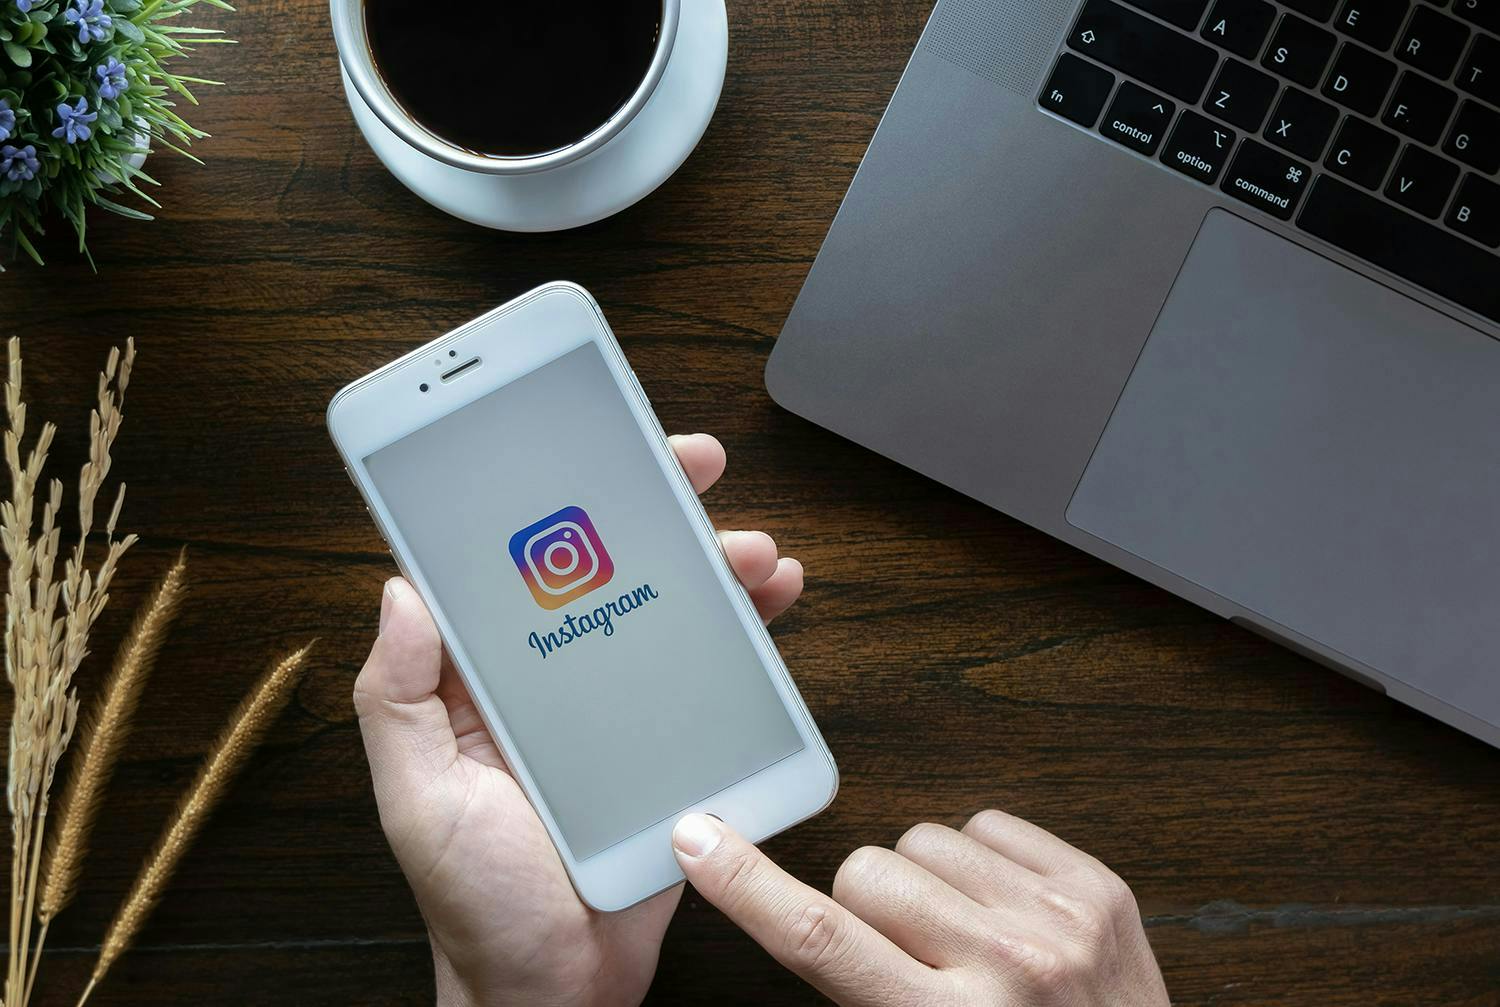 Image of the hand holding the smartphone with the Instagram logo displayed.